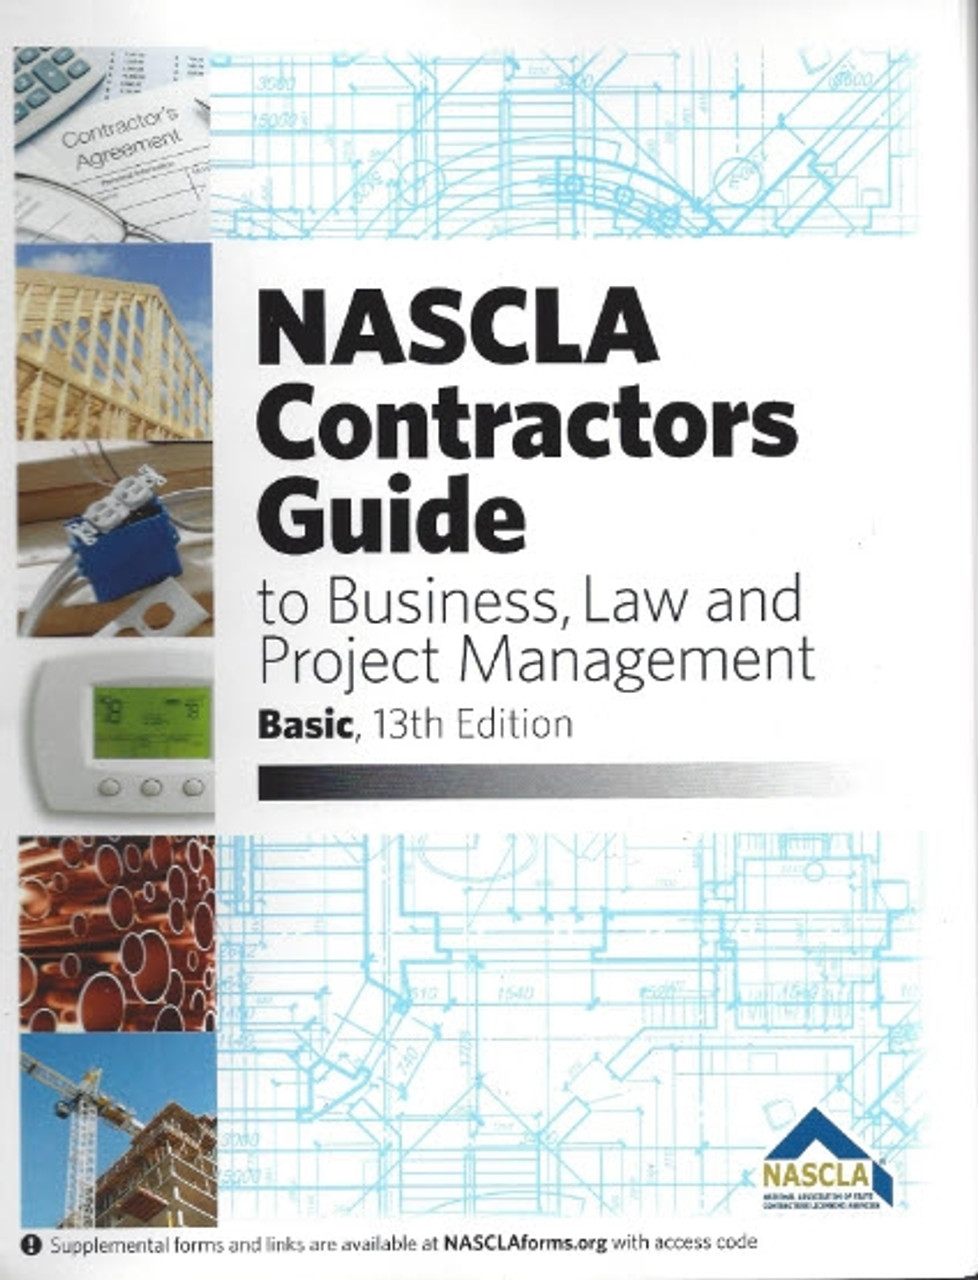 NASCLA Contractors Guide to Business, Law and Project Management, Basic 14th Edition